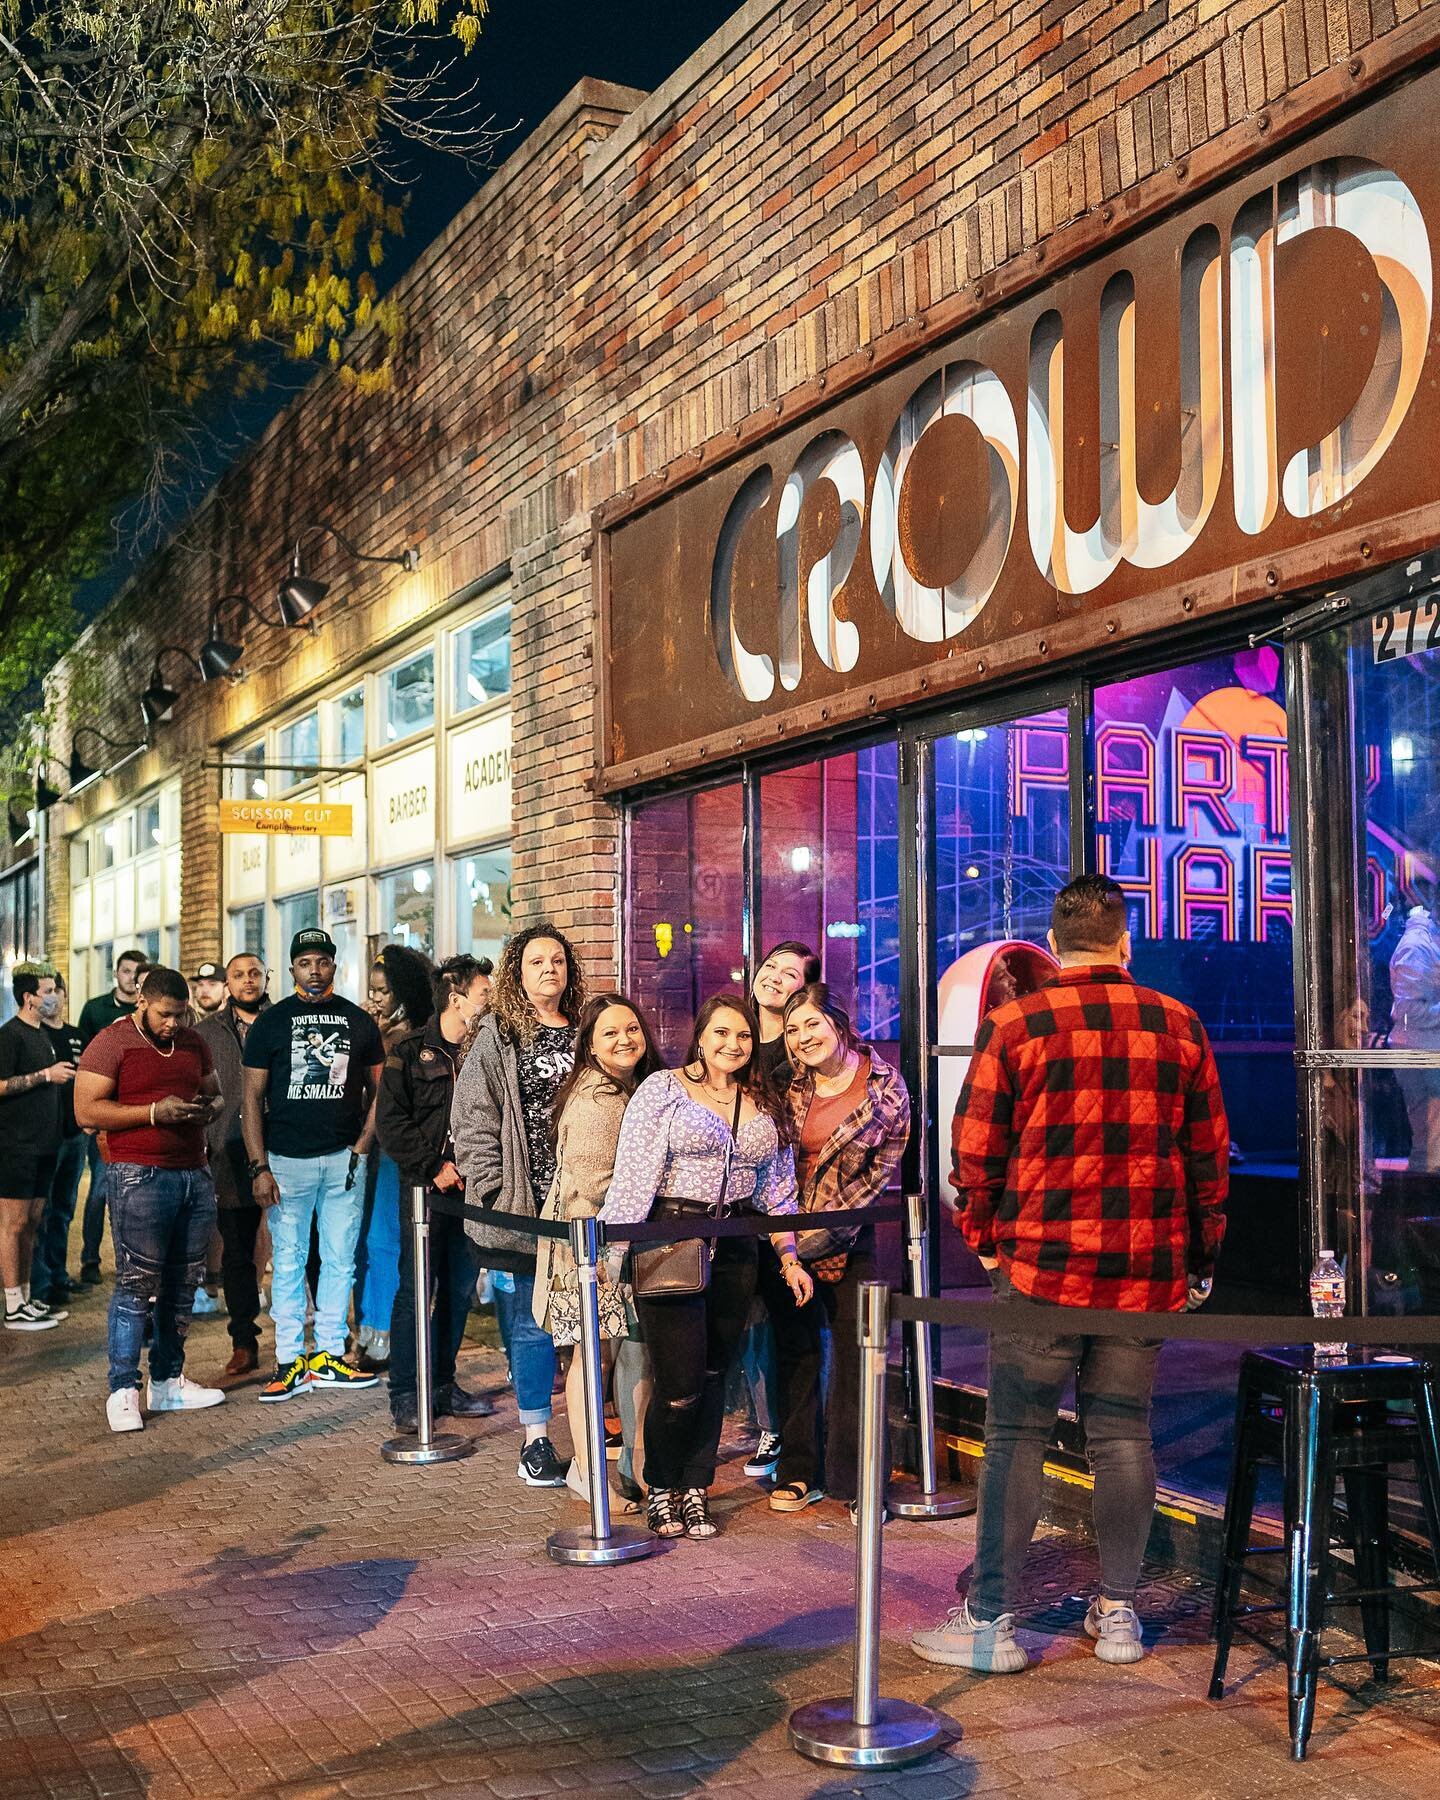 The best place to get the party started this weekend is at @crowdusbar, an intimate environment to hang out with your best friends!